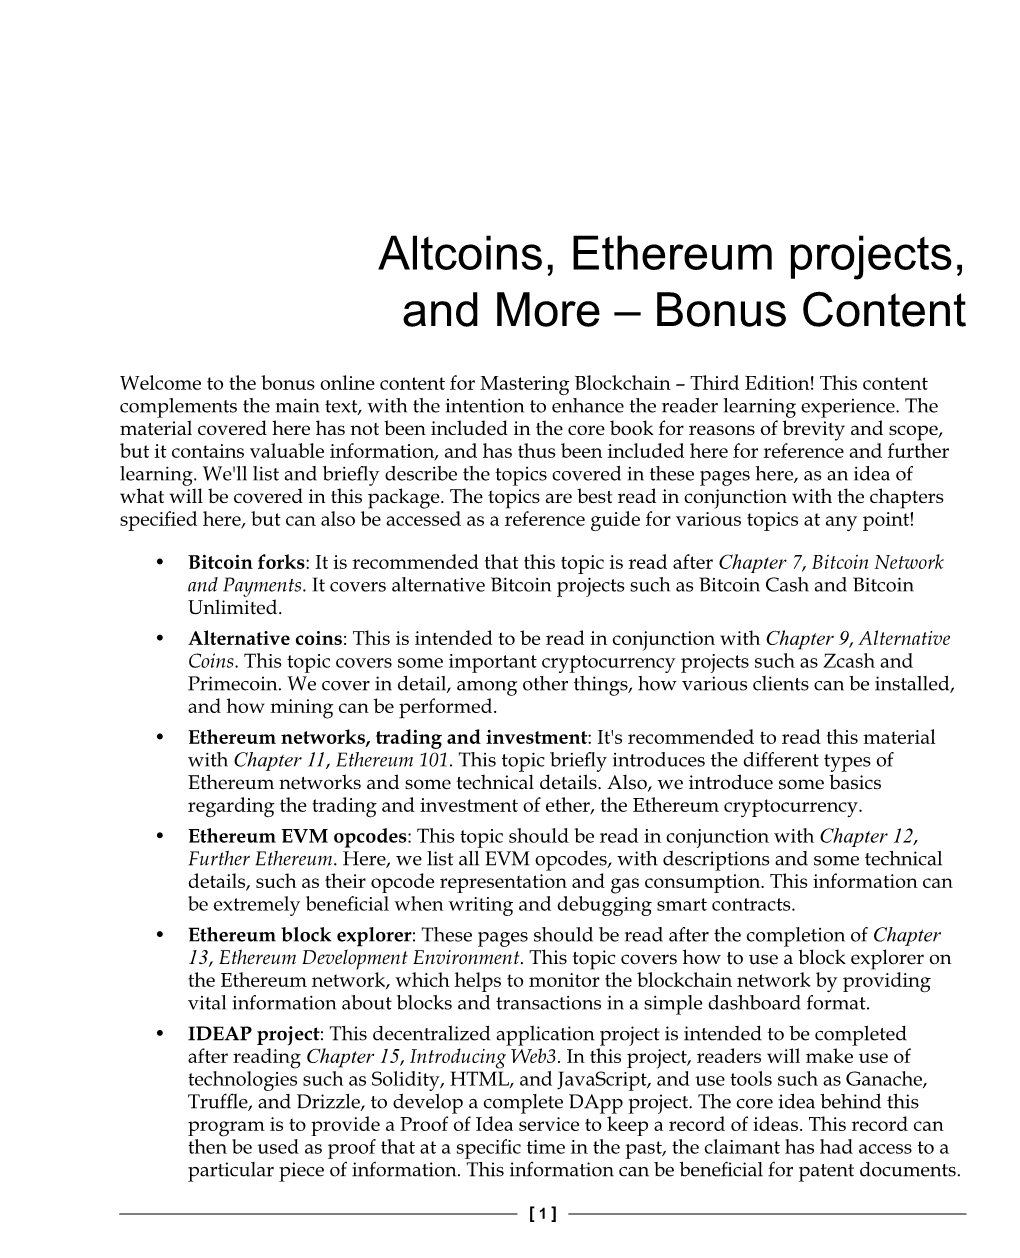 Altcoins, Ethereum Projects, and More – Bonus Content